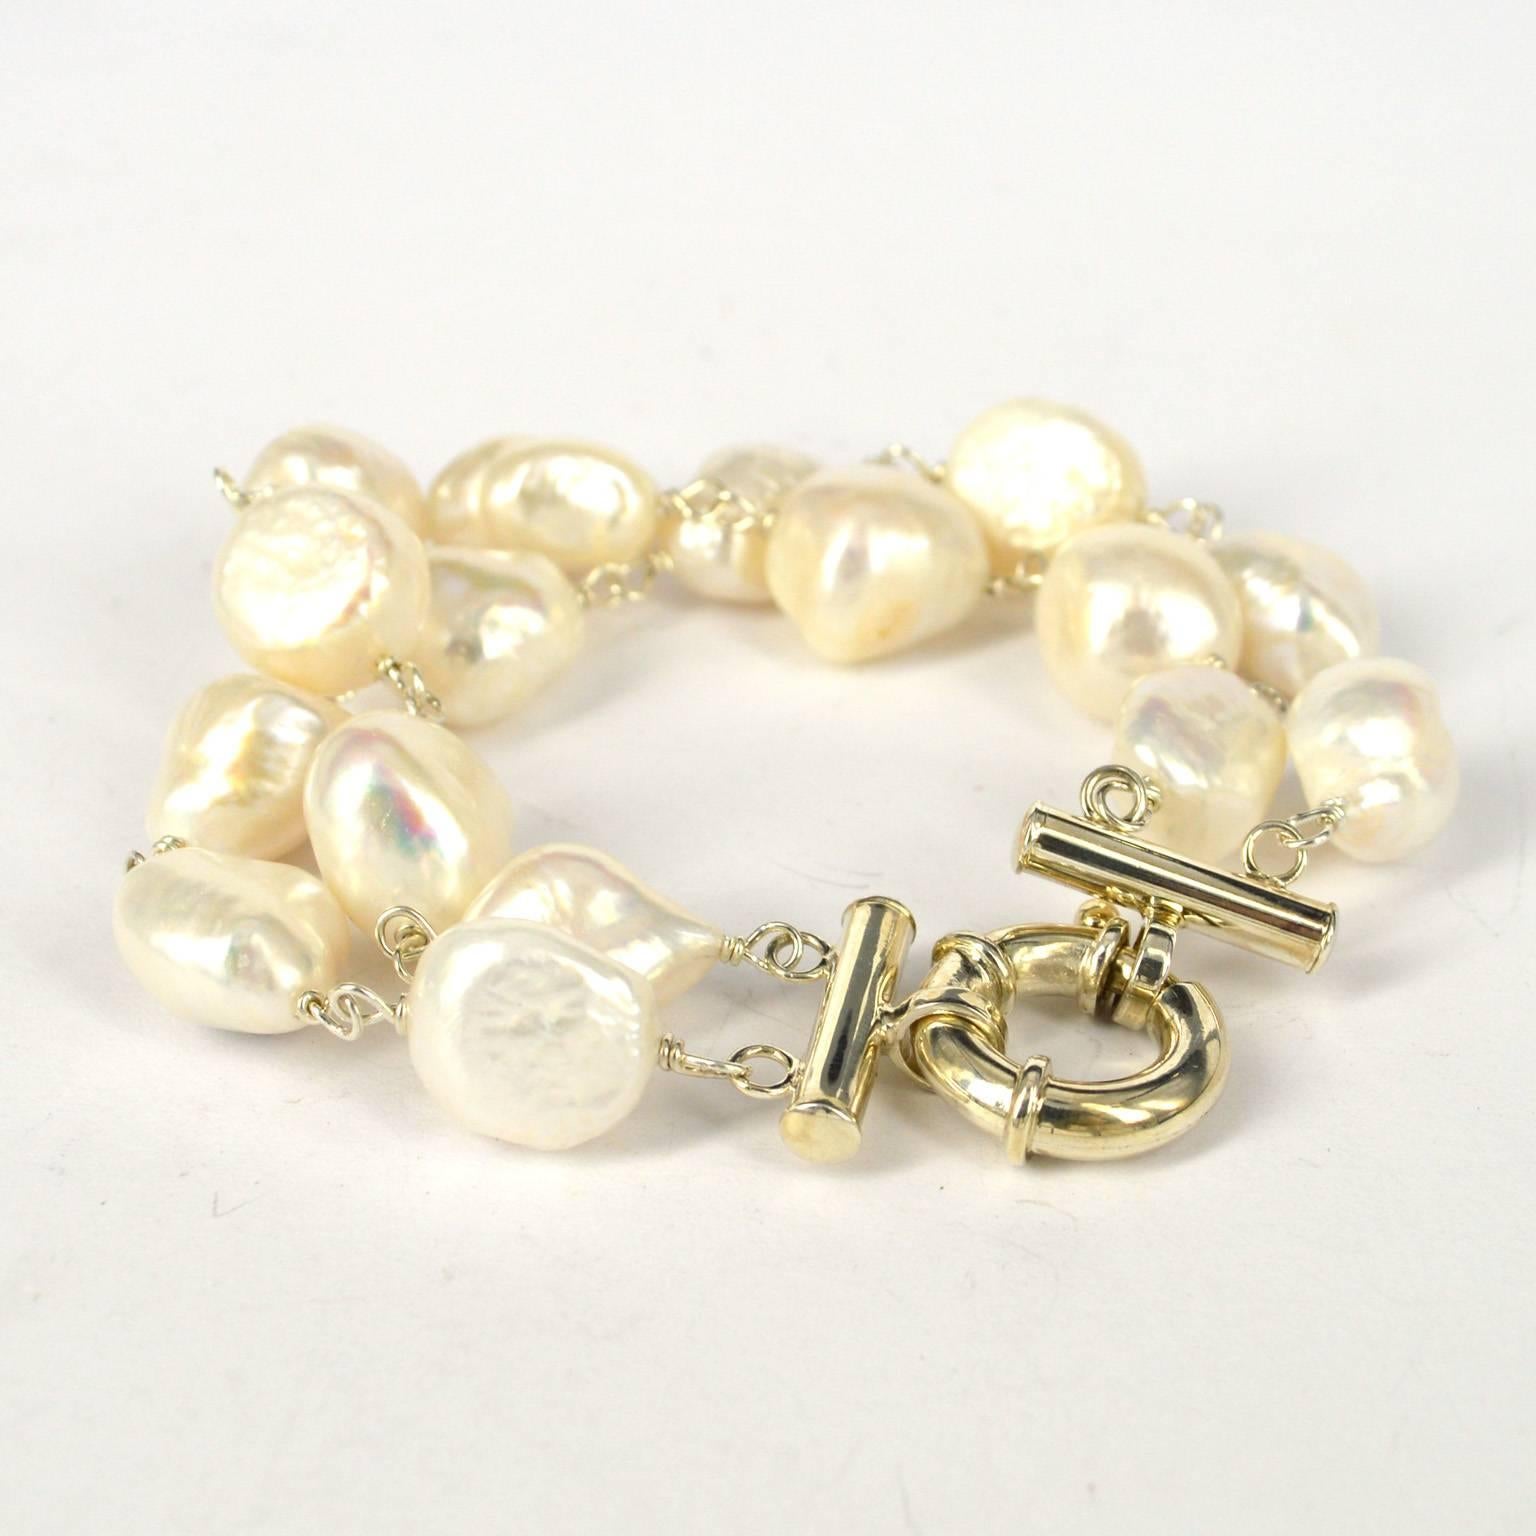 Double strand of baroque fresh water pearls in wire wrapped in 925 Sterling Silver. 
Pearls are approx. 16mm 
Total length of bracelet 22cm
Sterling Silver bolt clasp